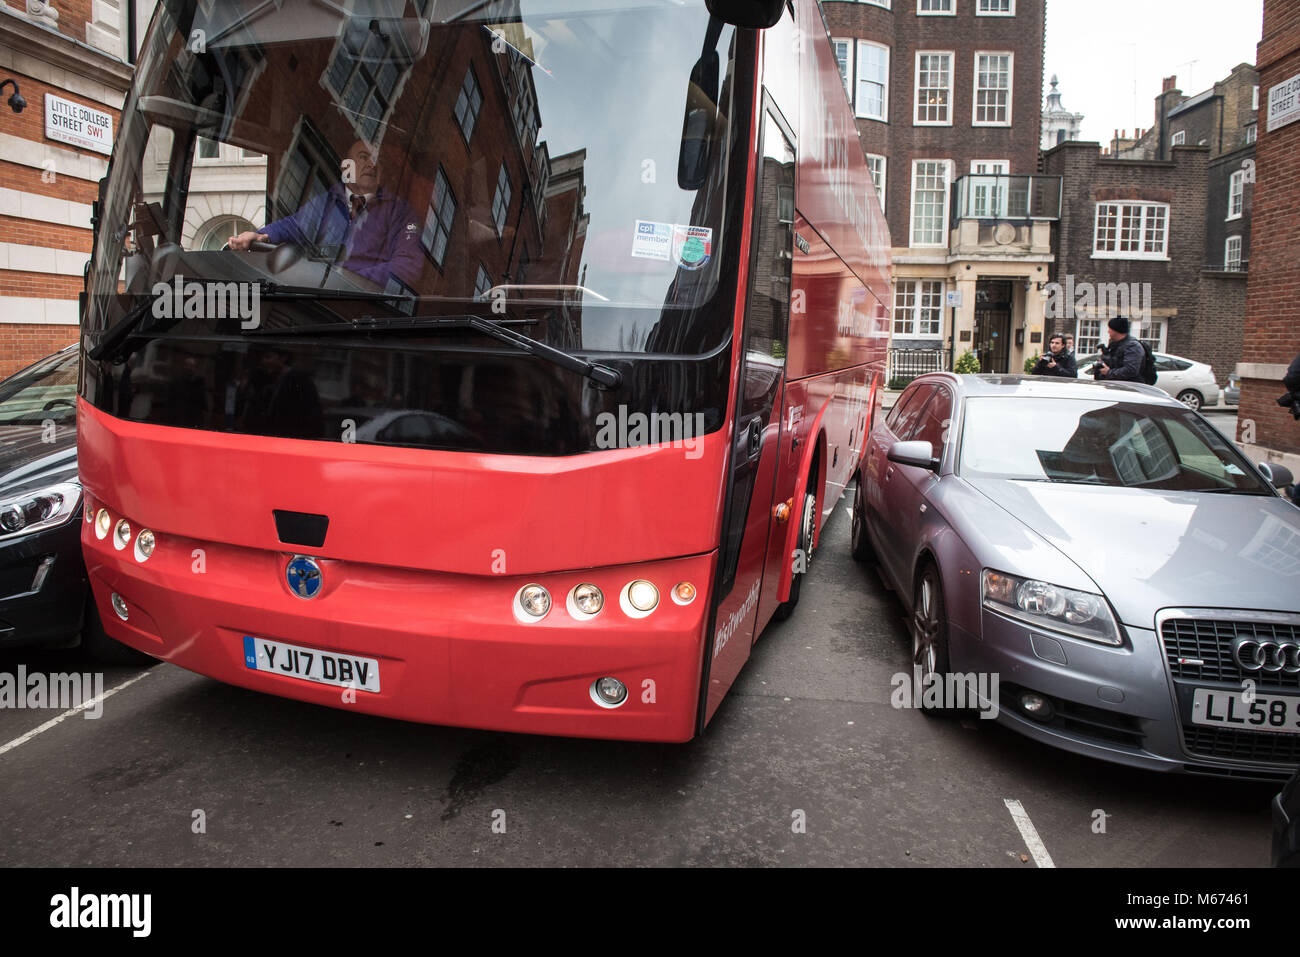 College Green, Westminster, London, UK. 21st February 2018. The Brexit Bus experiences a tight squeeze between parked cars in Westminster. Stock Photo